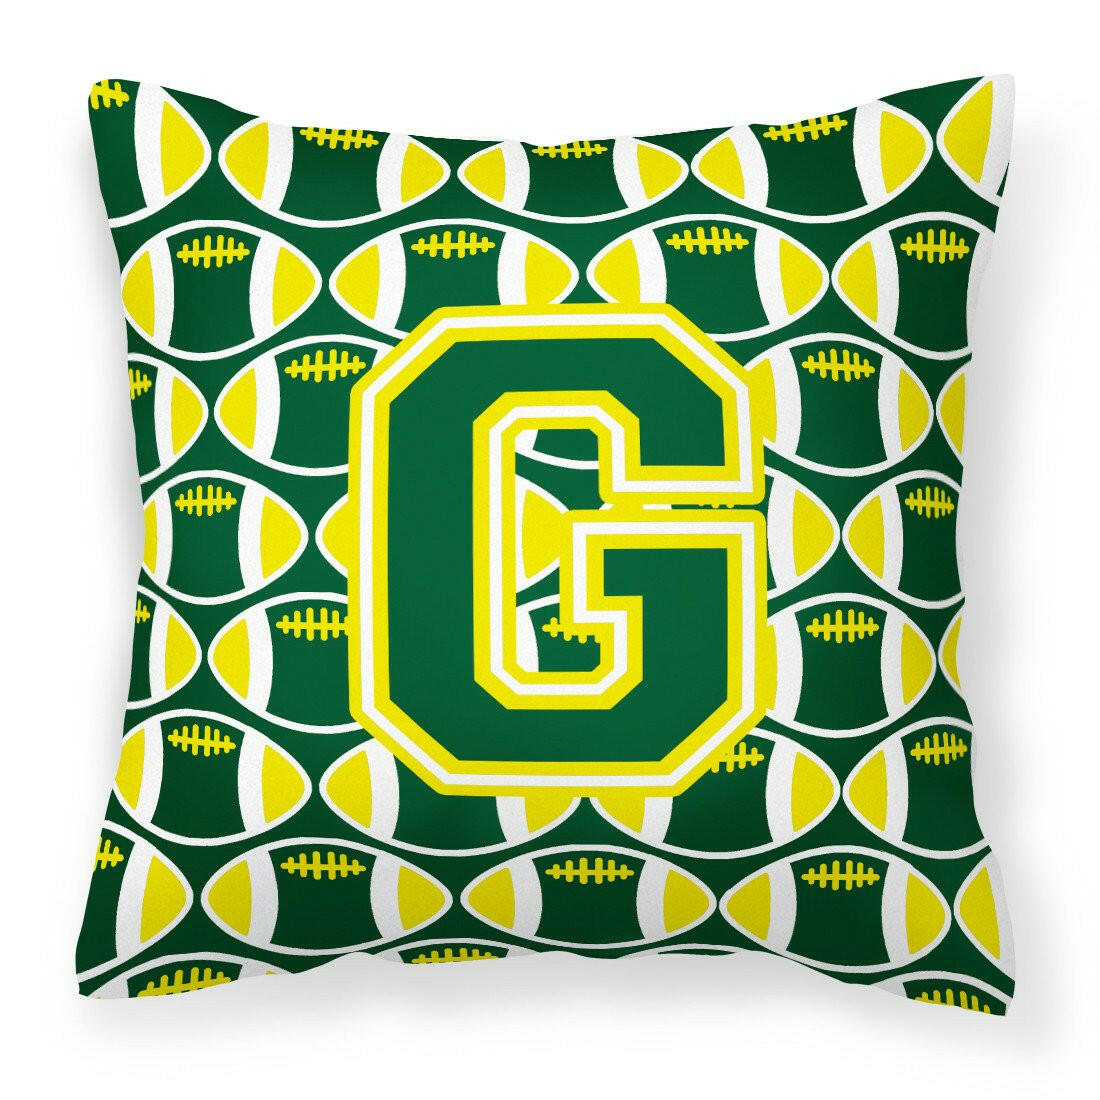 Letter G Football Green and Yellow Fabric Decorative Pillow CJ1075-GPW1414 by Caroline's Treasures